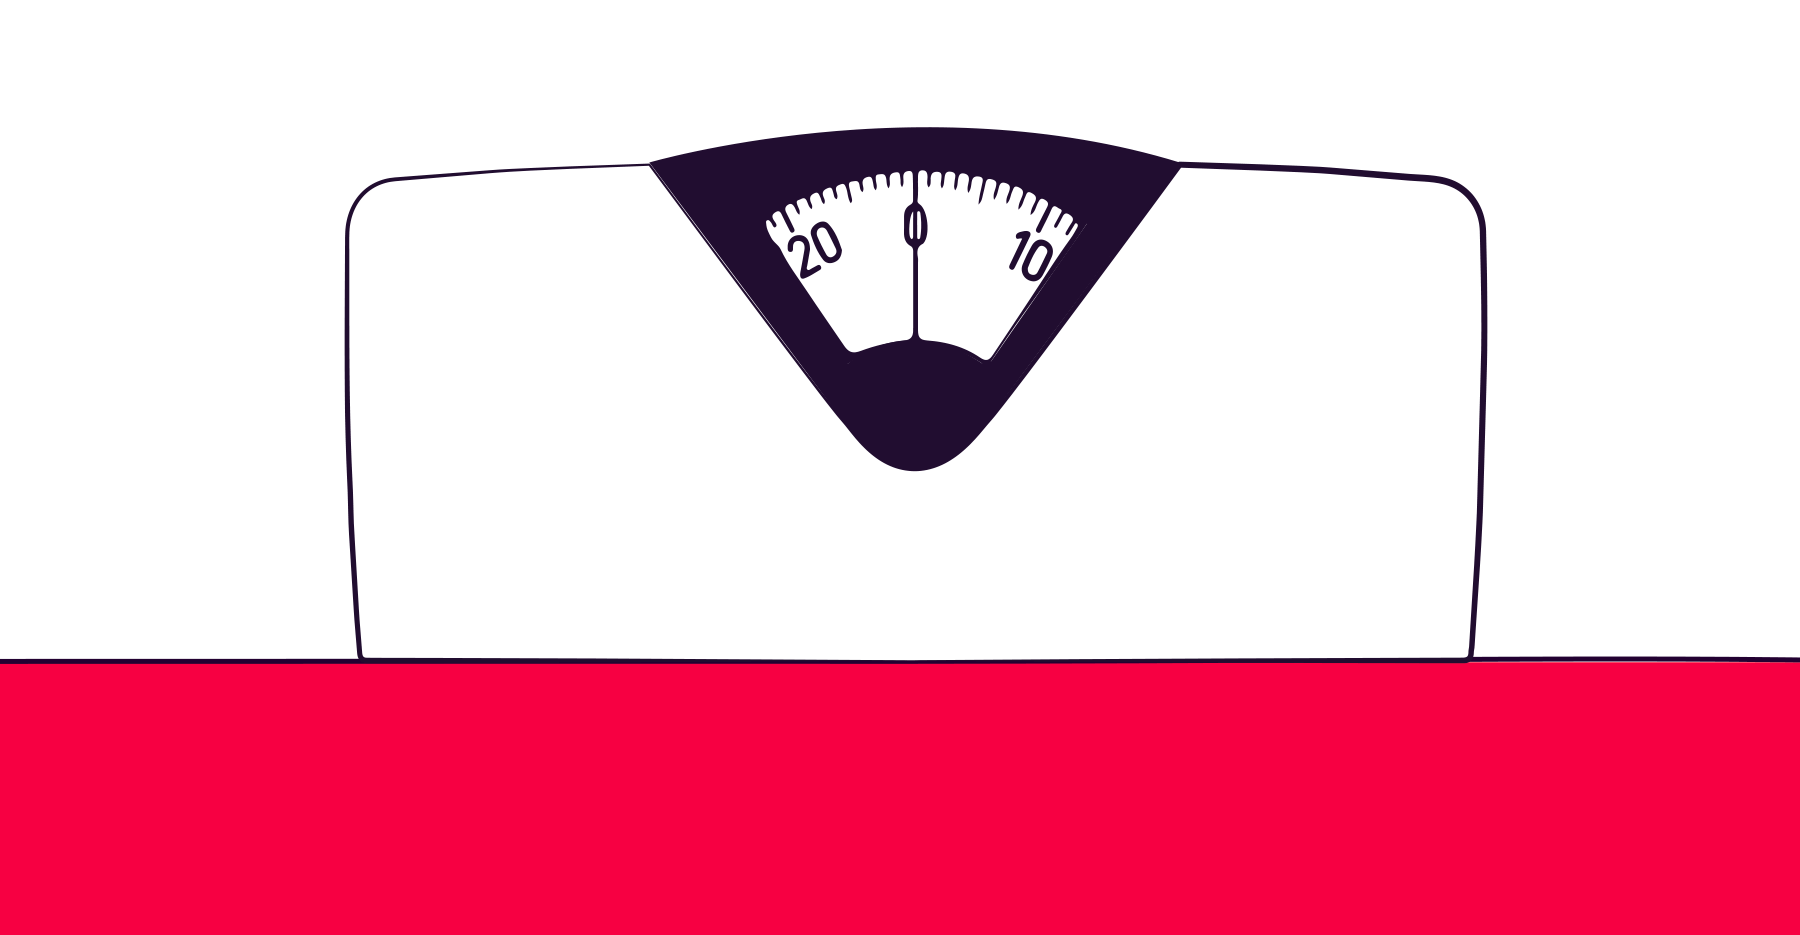 An illustration of a scale over a red background